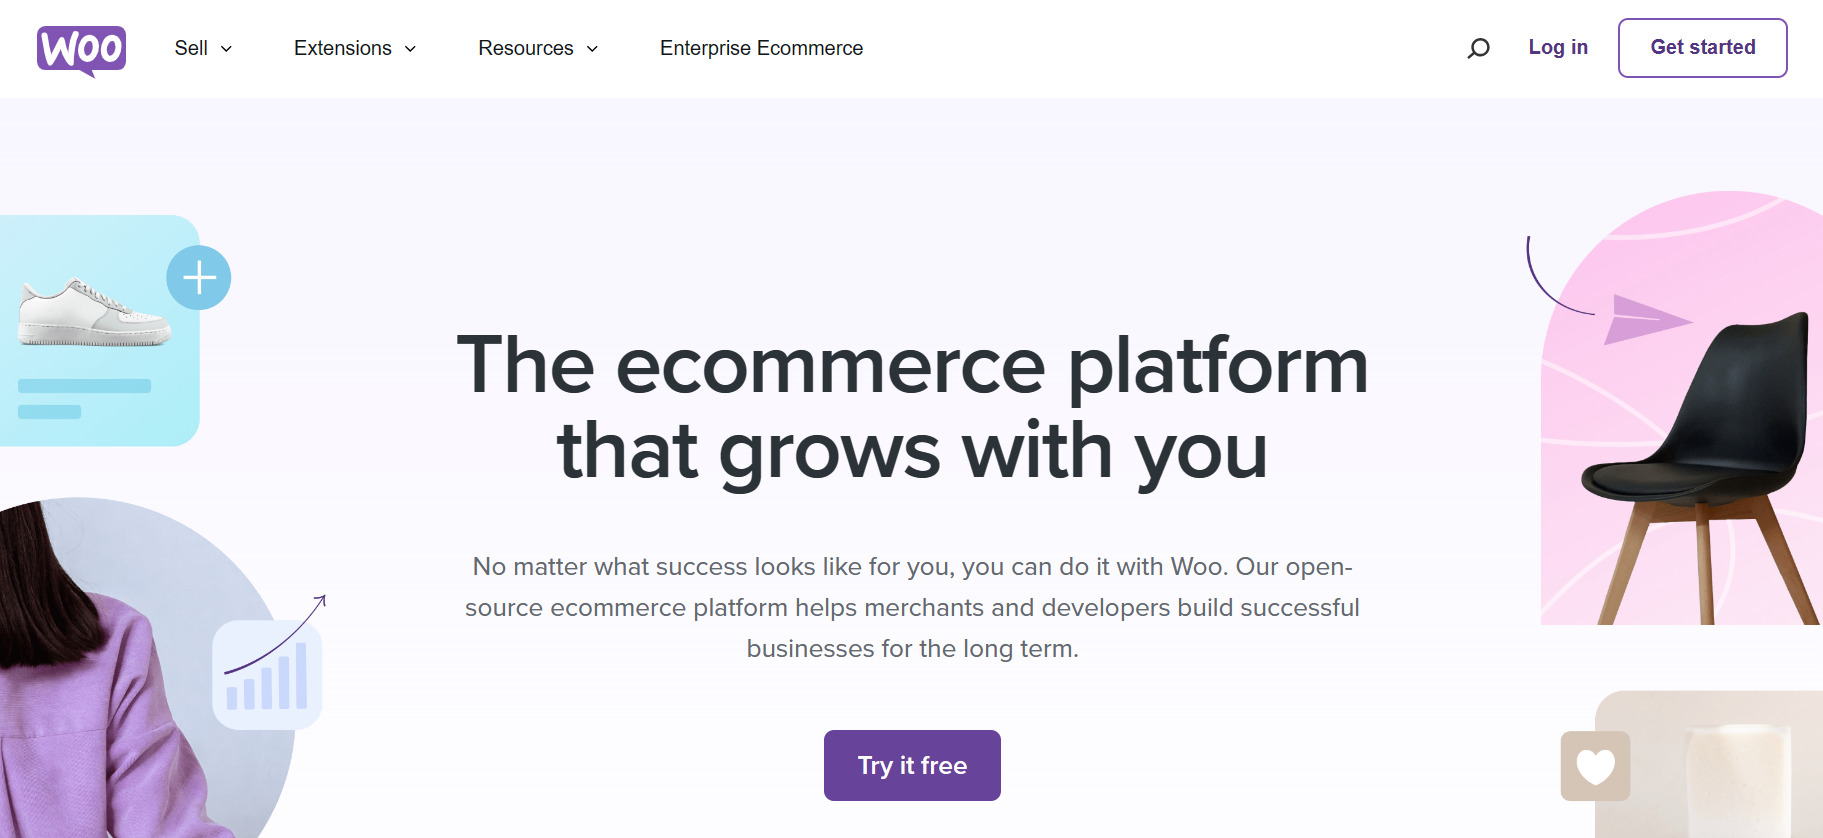 Build your online store: Discover the best platforms and tools for a successful e-commerce business. Start selling online today!